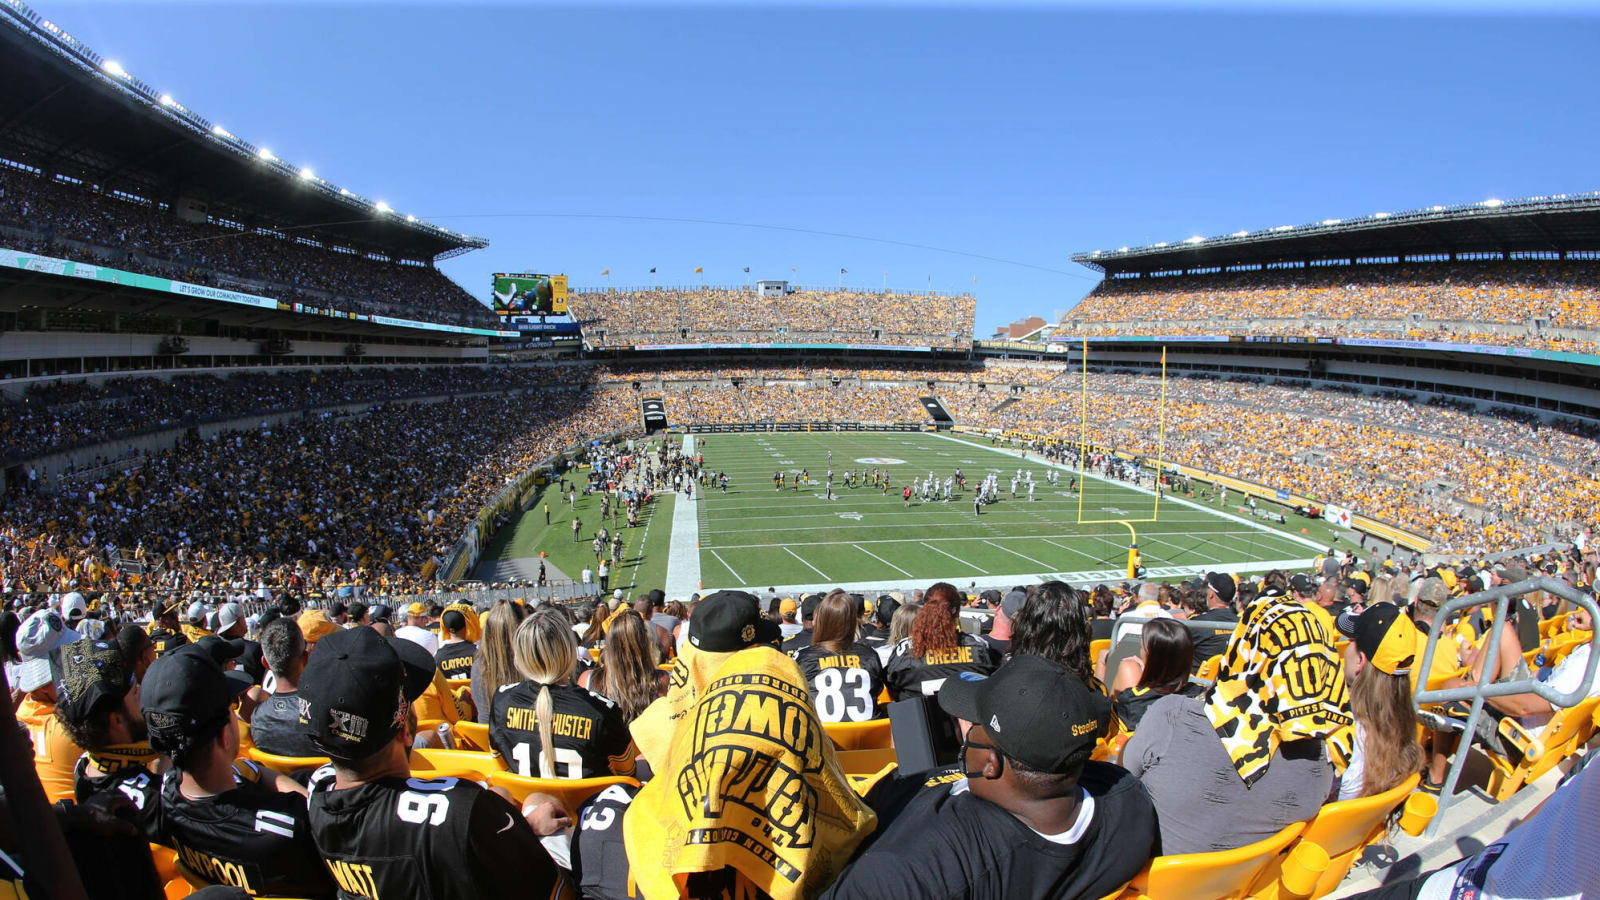 A Guide to Acrisure Stadium for Steelers Fans